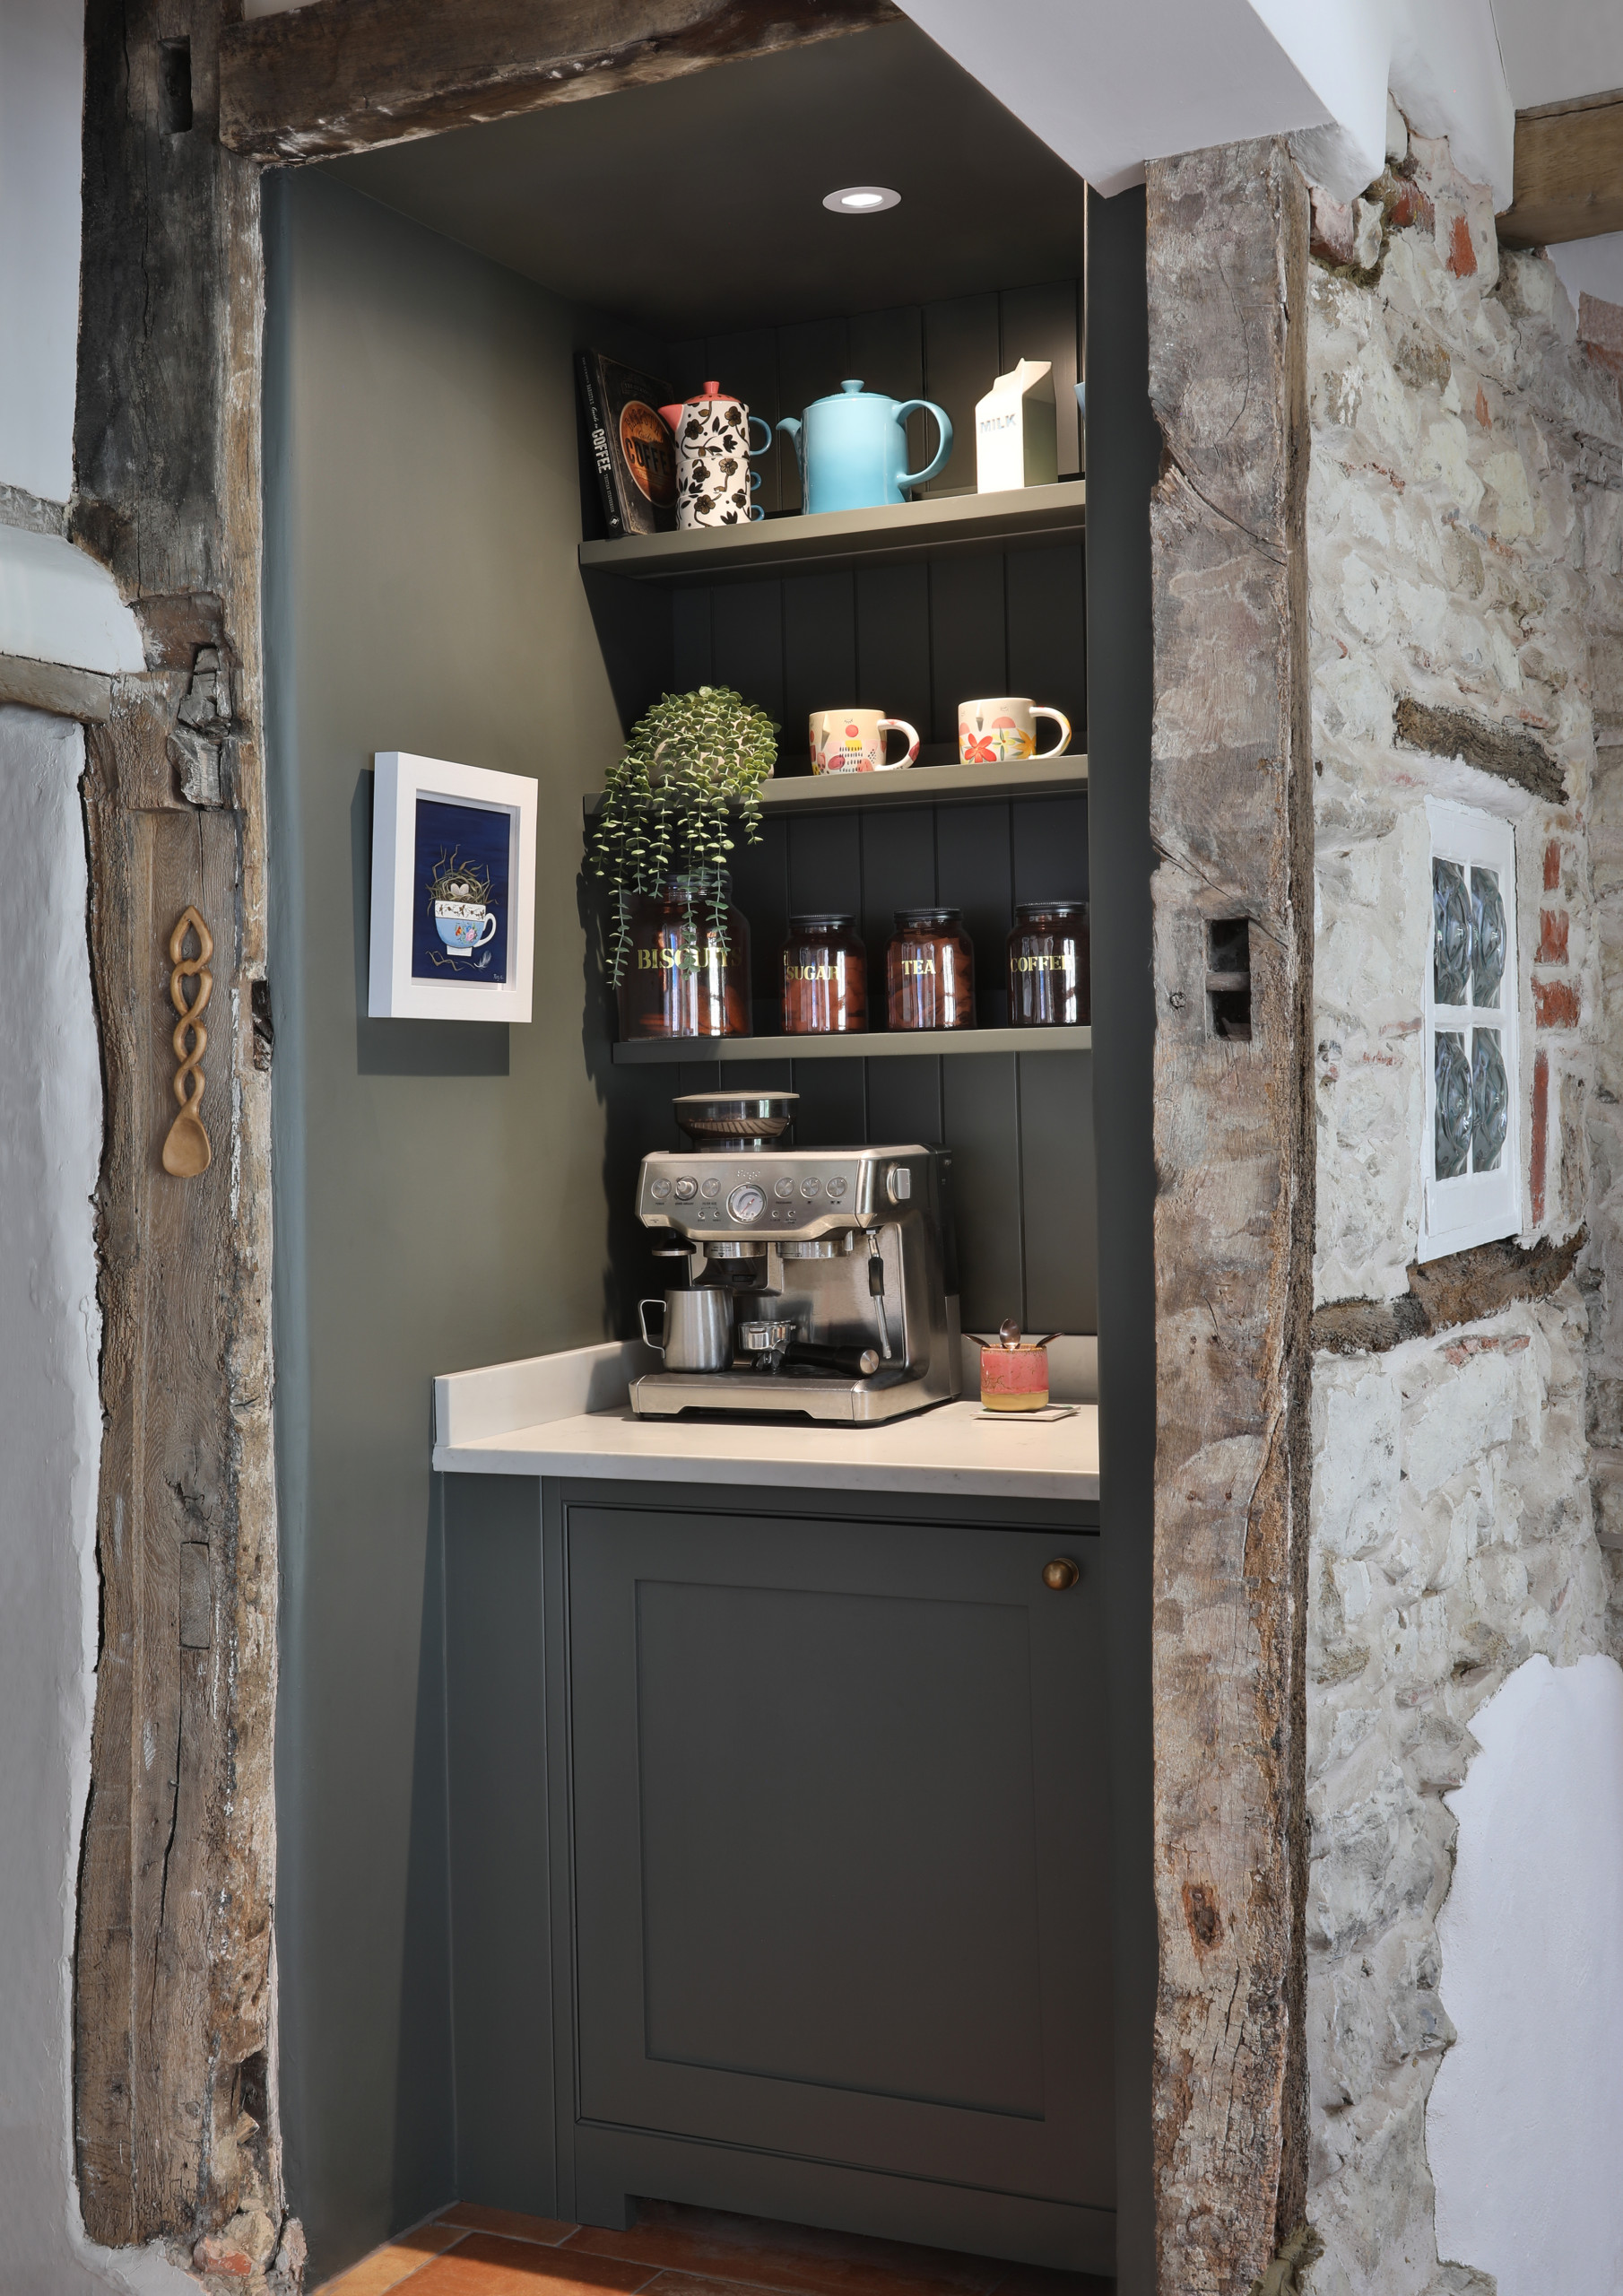 Our Best Coffee Bar Ideas for Your Kitchen Renovation